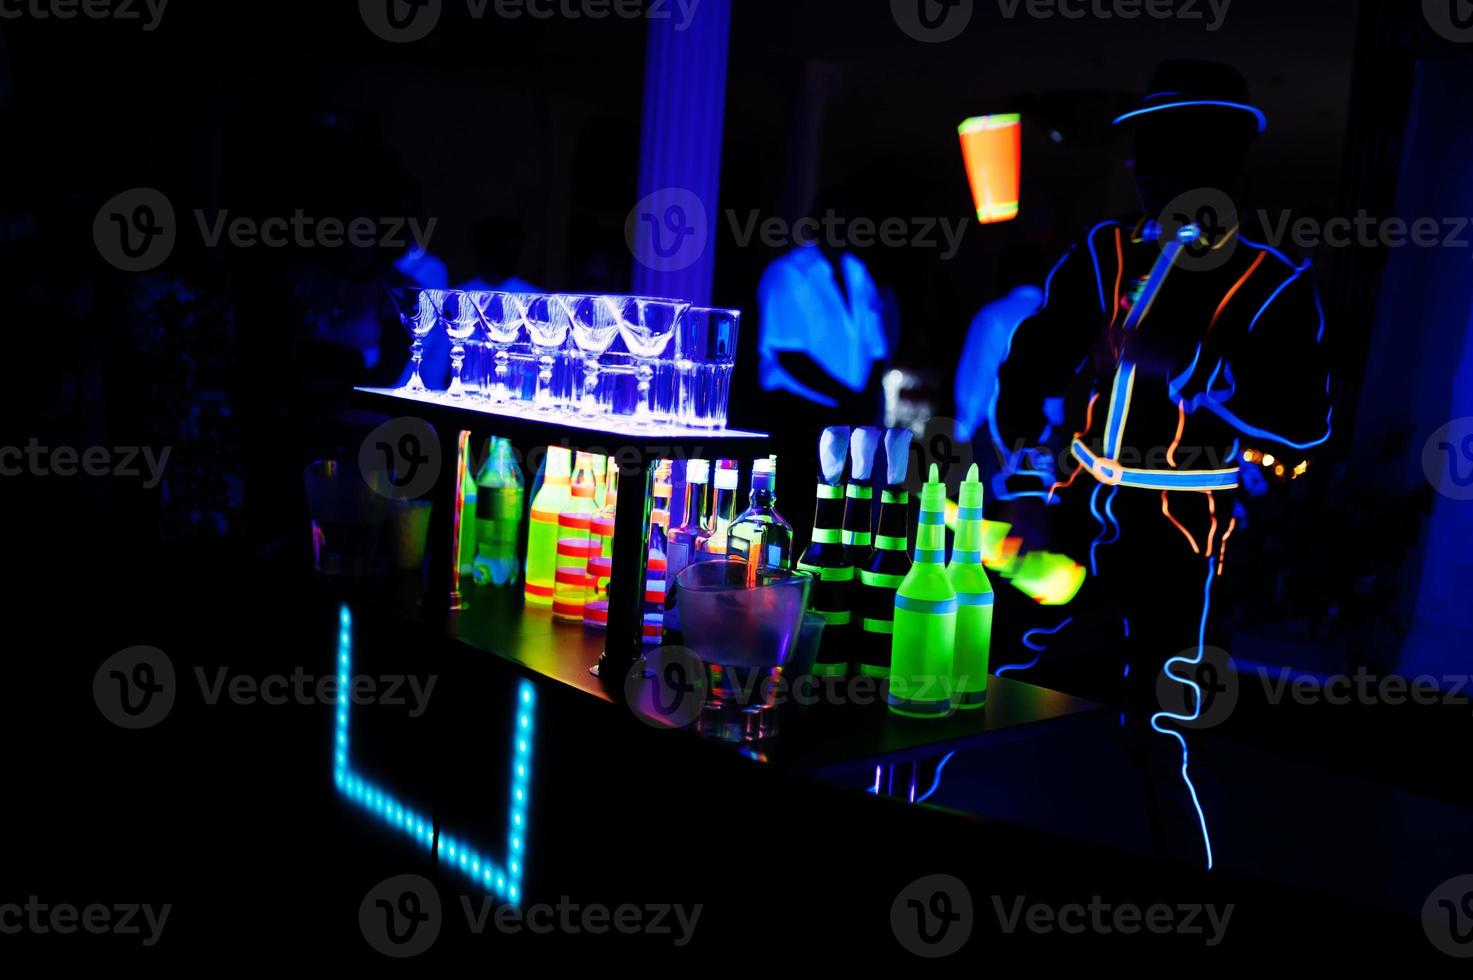 Professional barman and led light show. Silhouette of modern bartender shaking drink at night cocktail bar. photo